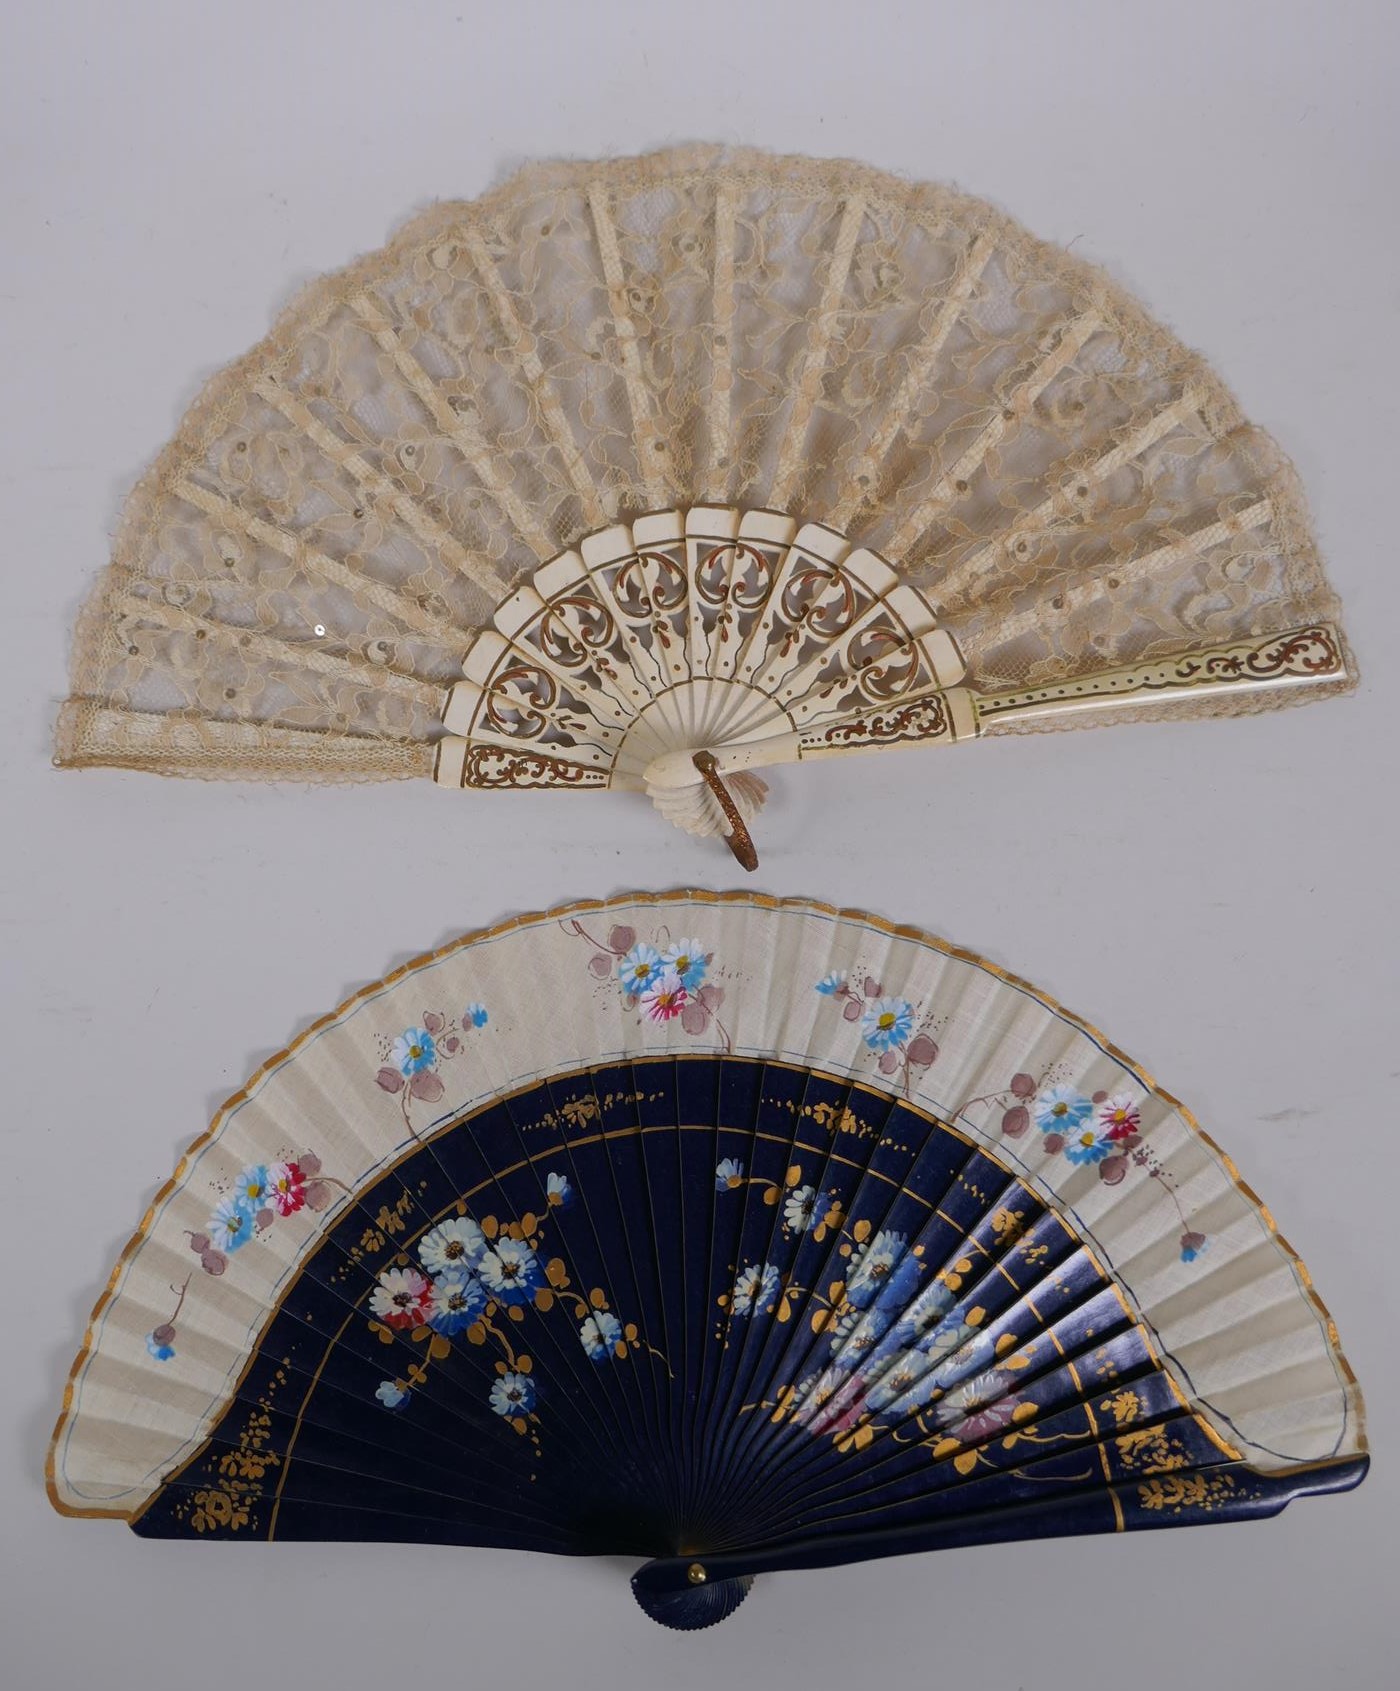 An antique carved wood and lace fan with gilt detail, together with linen and wood fan with hand